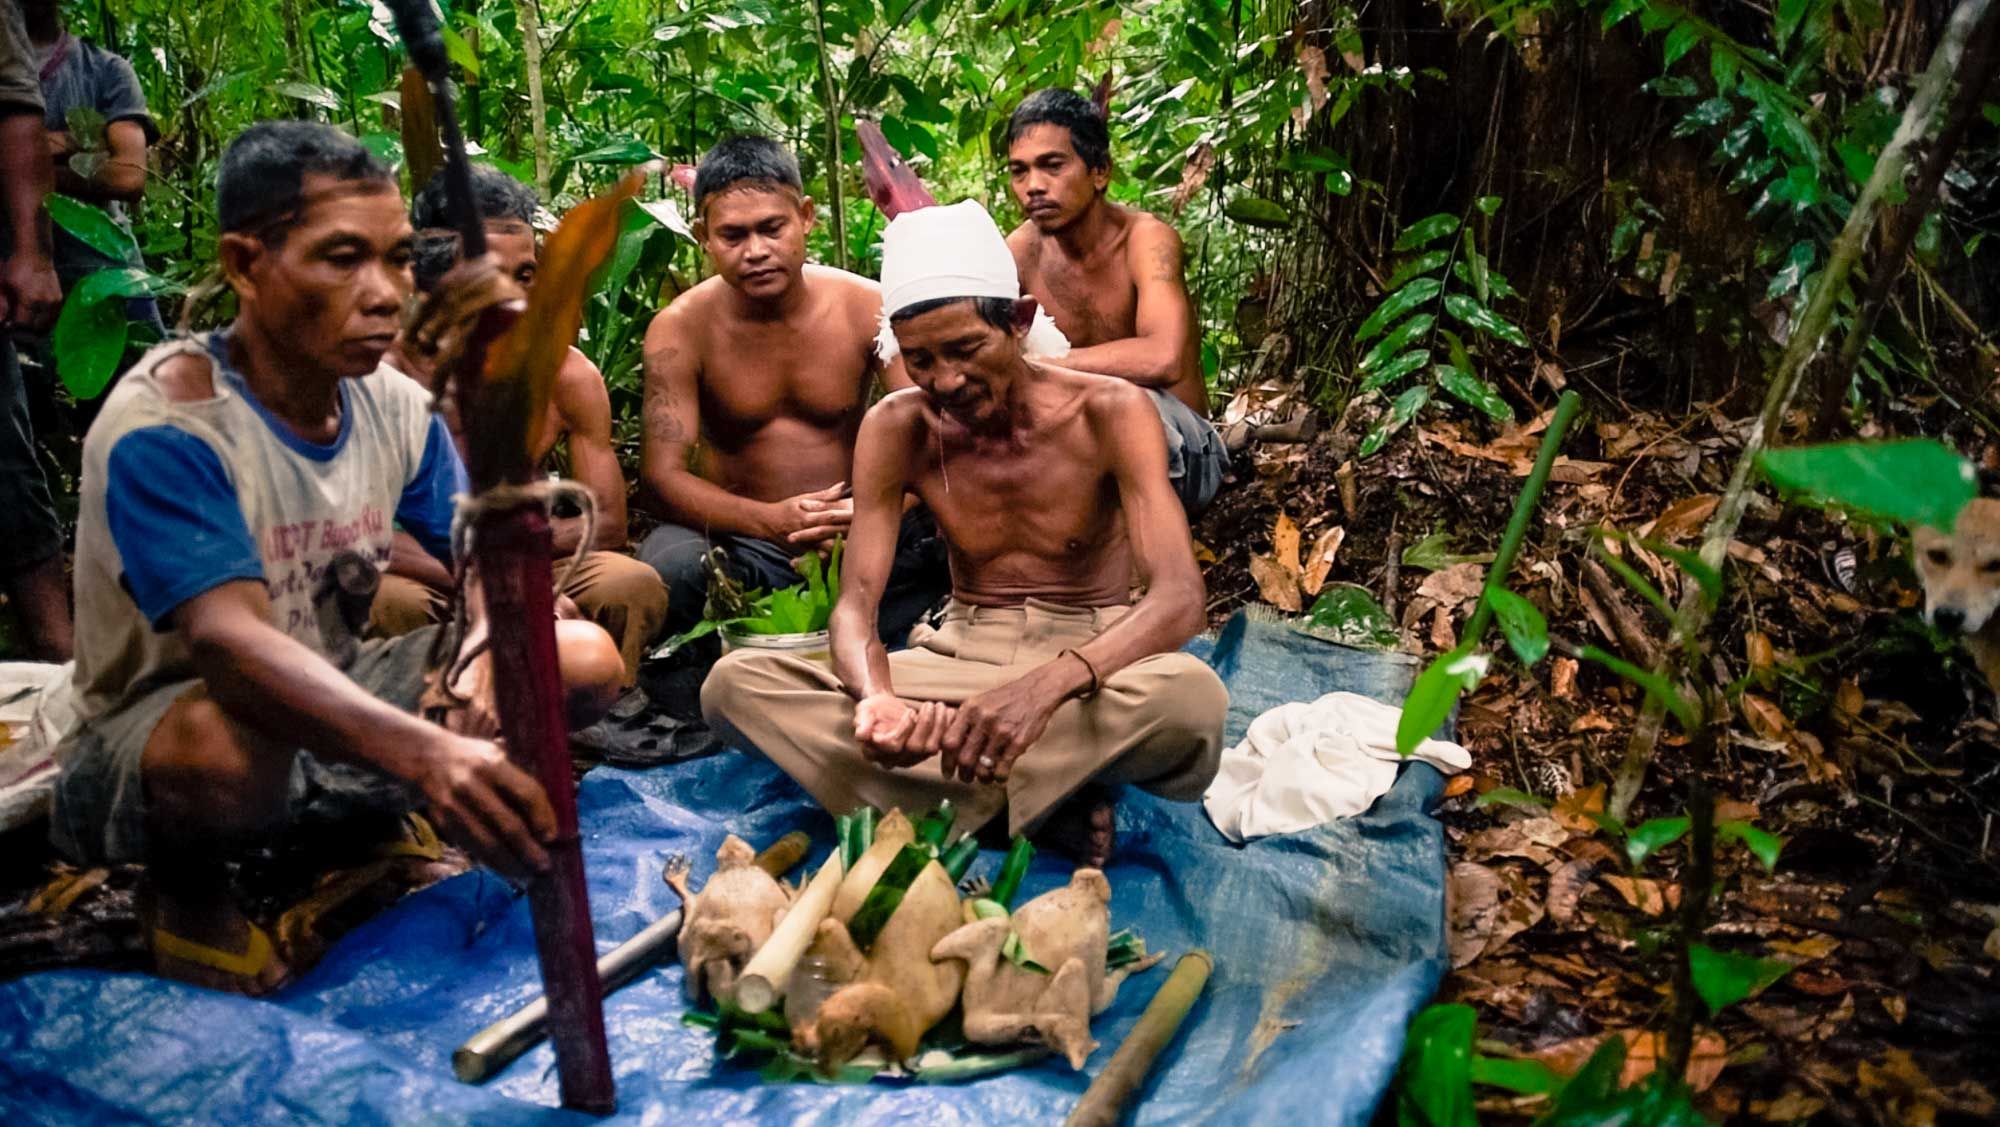 Pa’ Oyo leads a cleansing ceremony at the base of a giant ironwood tree. Living in the village of Pa’ Unga this Parigi Dayak tribe has refused repeated offers from logging, palm oil, and mining companies interested in setting up operations on their land